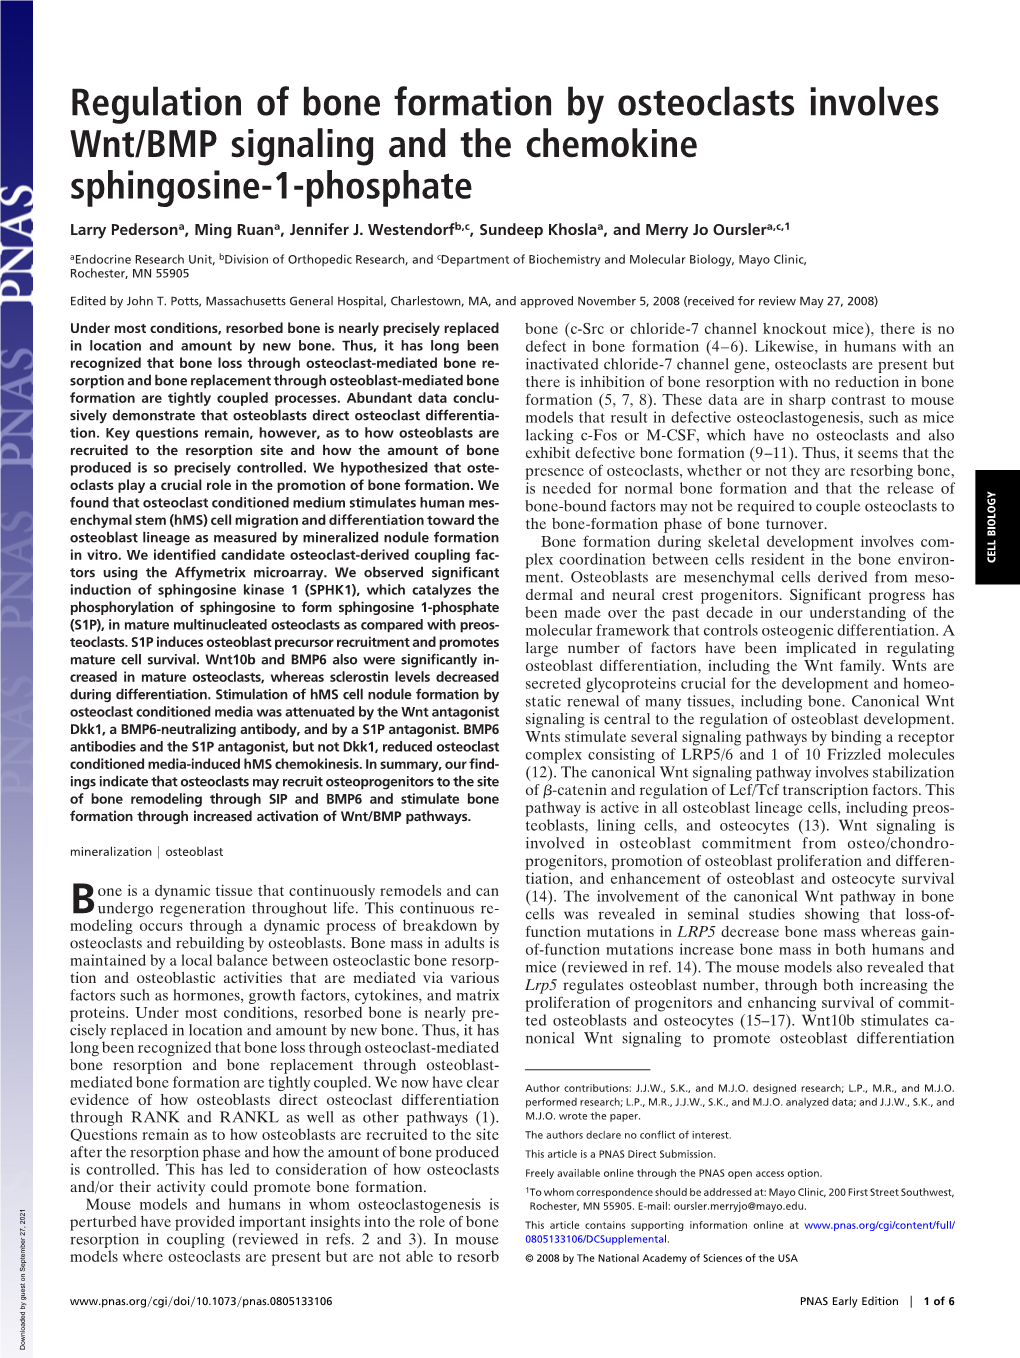 Regulation of Bone Formation by Osteoclasts Involves Wnt/BMP Signaling and the Chemokine Sphingosine-1-Phosphate